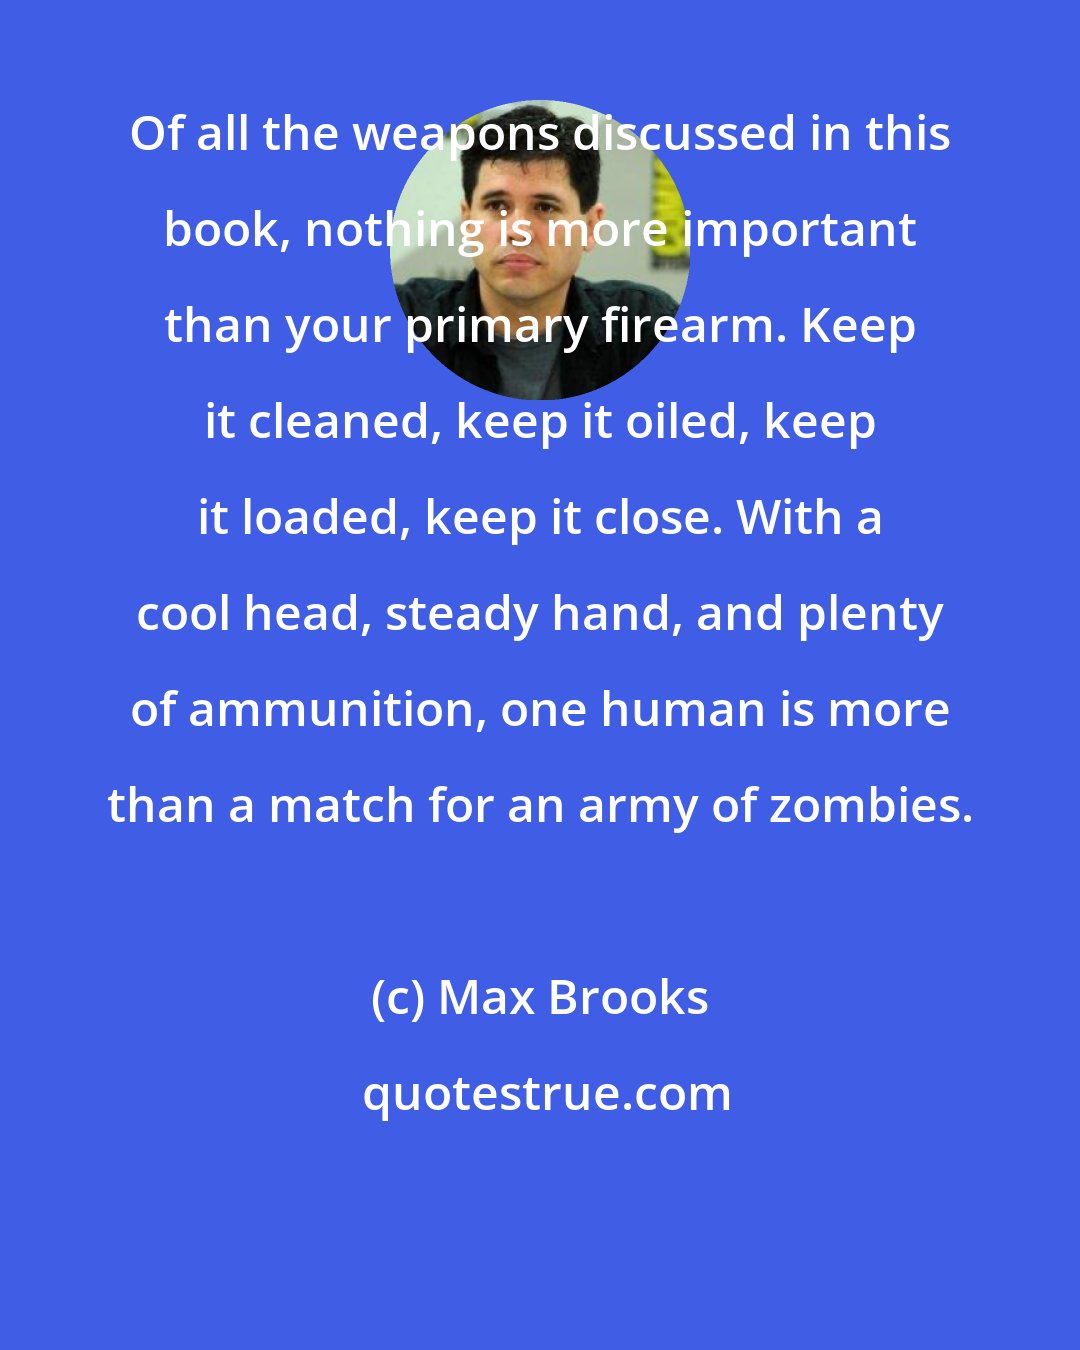 Max Brooks: Of all the weapons discussed in this book, nothing is more important than your primary firearm. Keep it cleaned, keep it oiled, keep it loaded, keep it close. With a cool head, steady hand, and plenty of ammunition, one human is more than a match for an army of zombies.